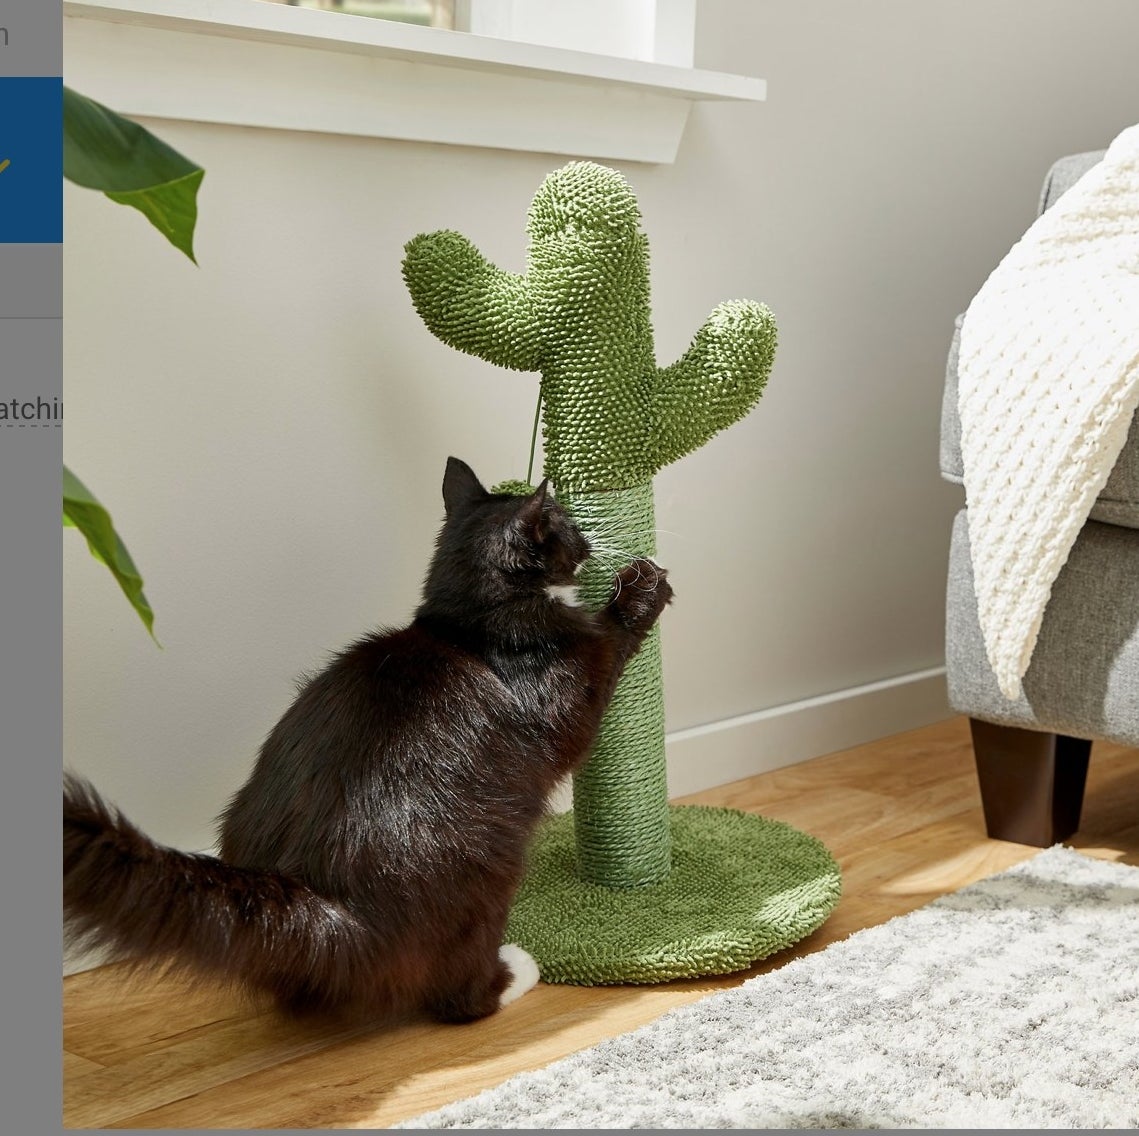 Black cat playing with green cactus shaped toy